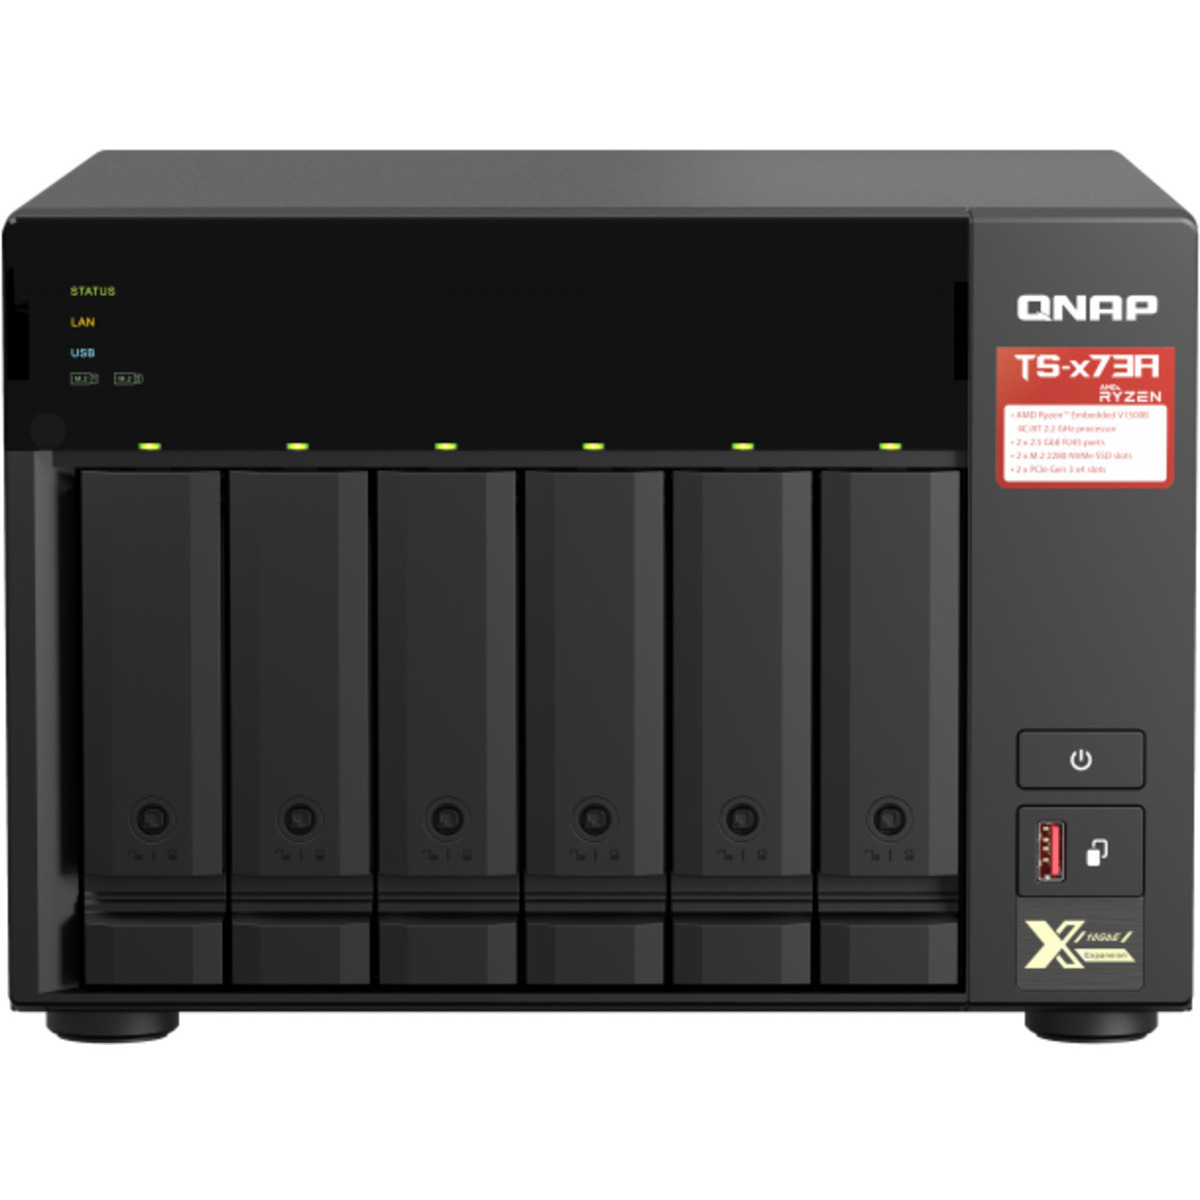 QNAP TS-673A 84tb 6-Bay Desktop Multimedia / Power User / Business NAS - Network Attached Storage Device 6x14tb Seagate IronWolf Pro ST14000NT001 3.5 7200rpm SATA 6Gb/s HDD NAS Class Drives Installed - Burn-In Tested TS-673A